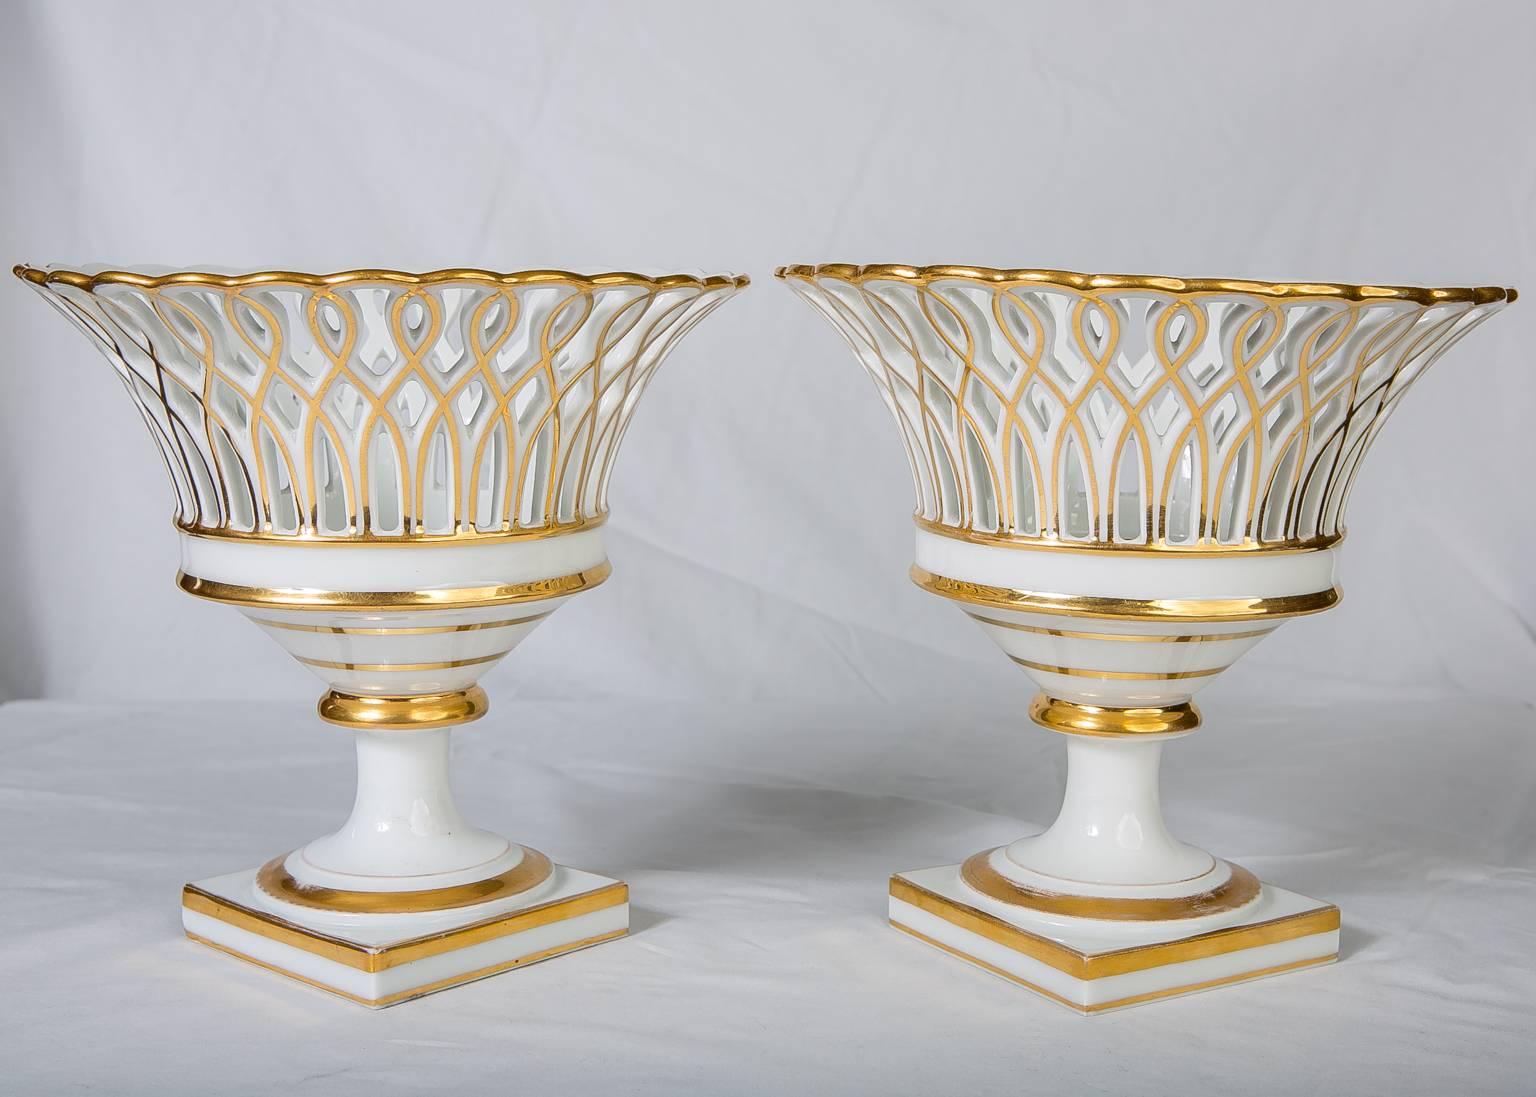 An elegant pair of gilded Paris porcelain pierced baskets with everted rims. They stand on square bases. This pair would enhance any sideboard or table.